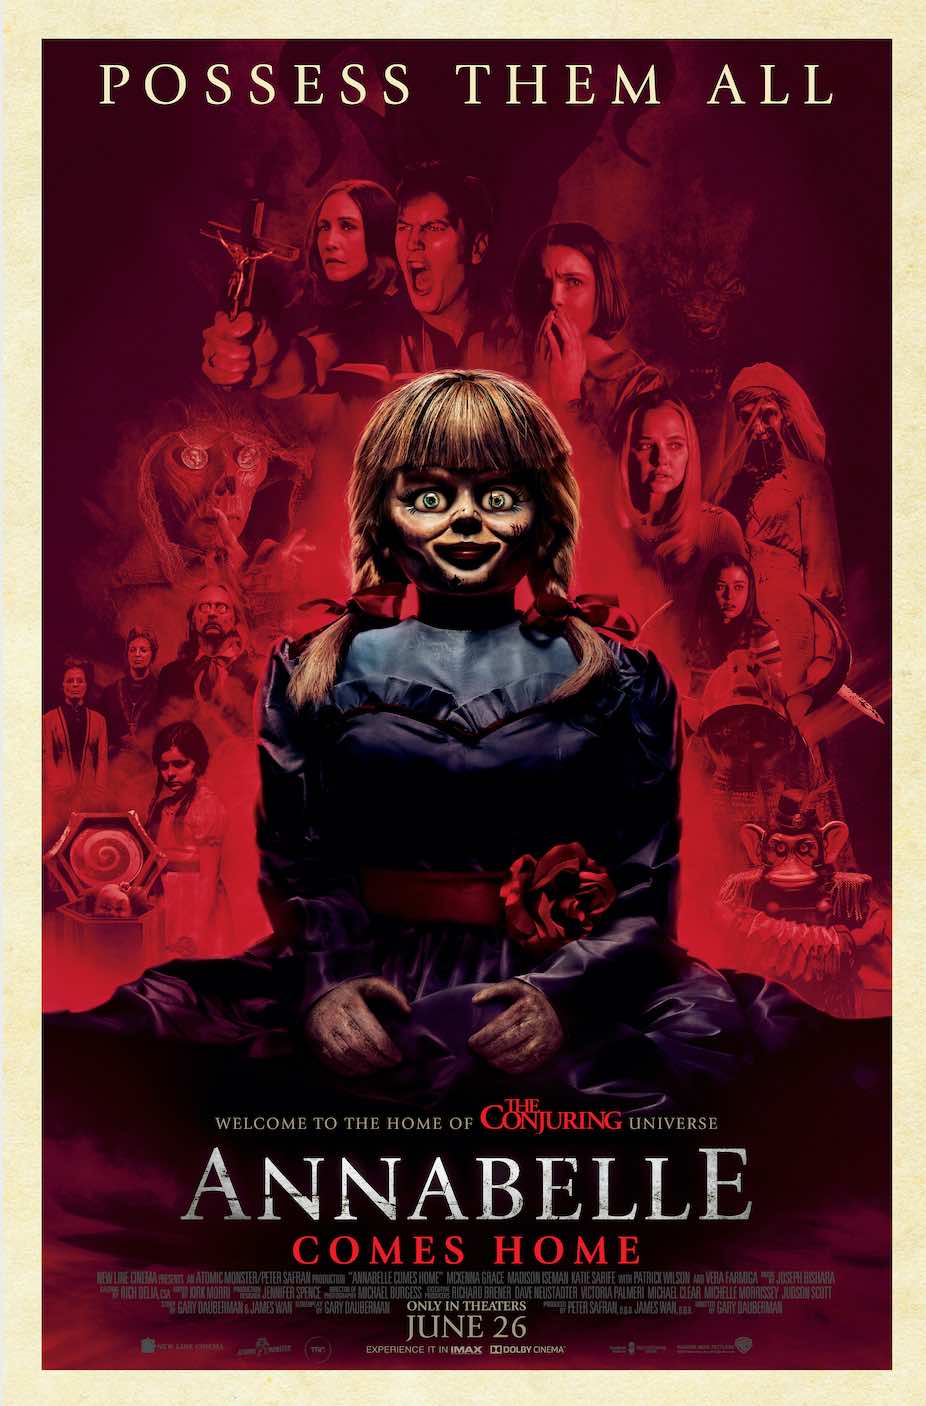 Annabelle comes home poster